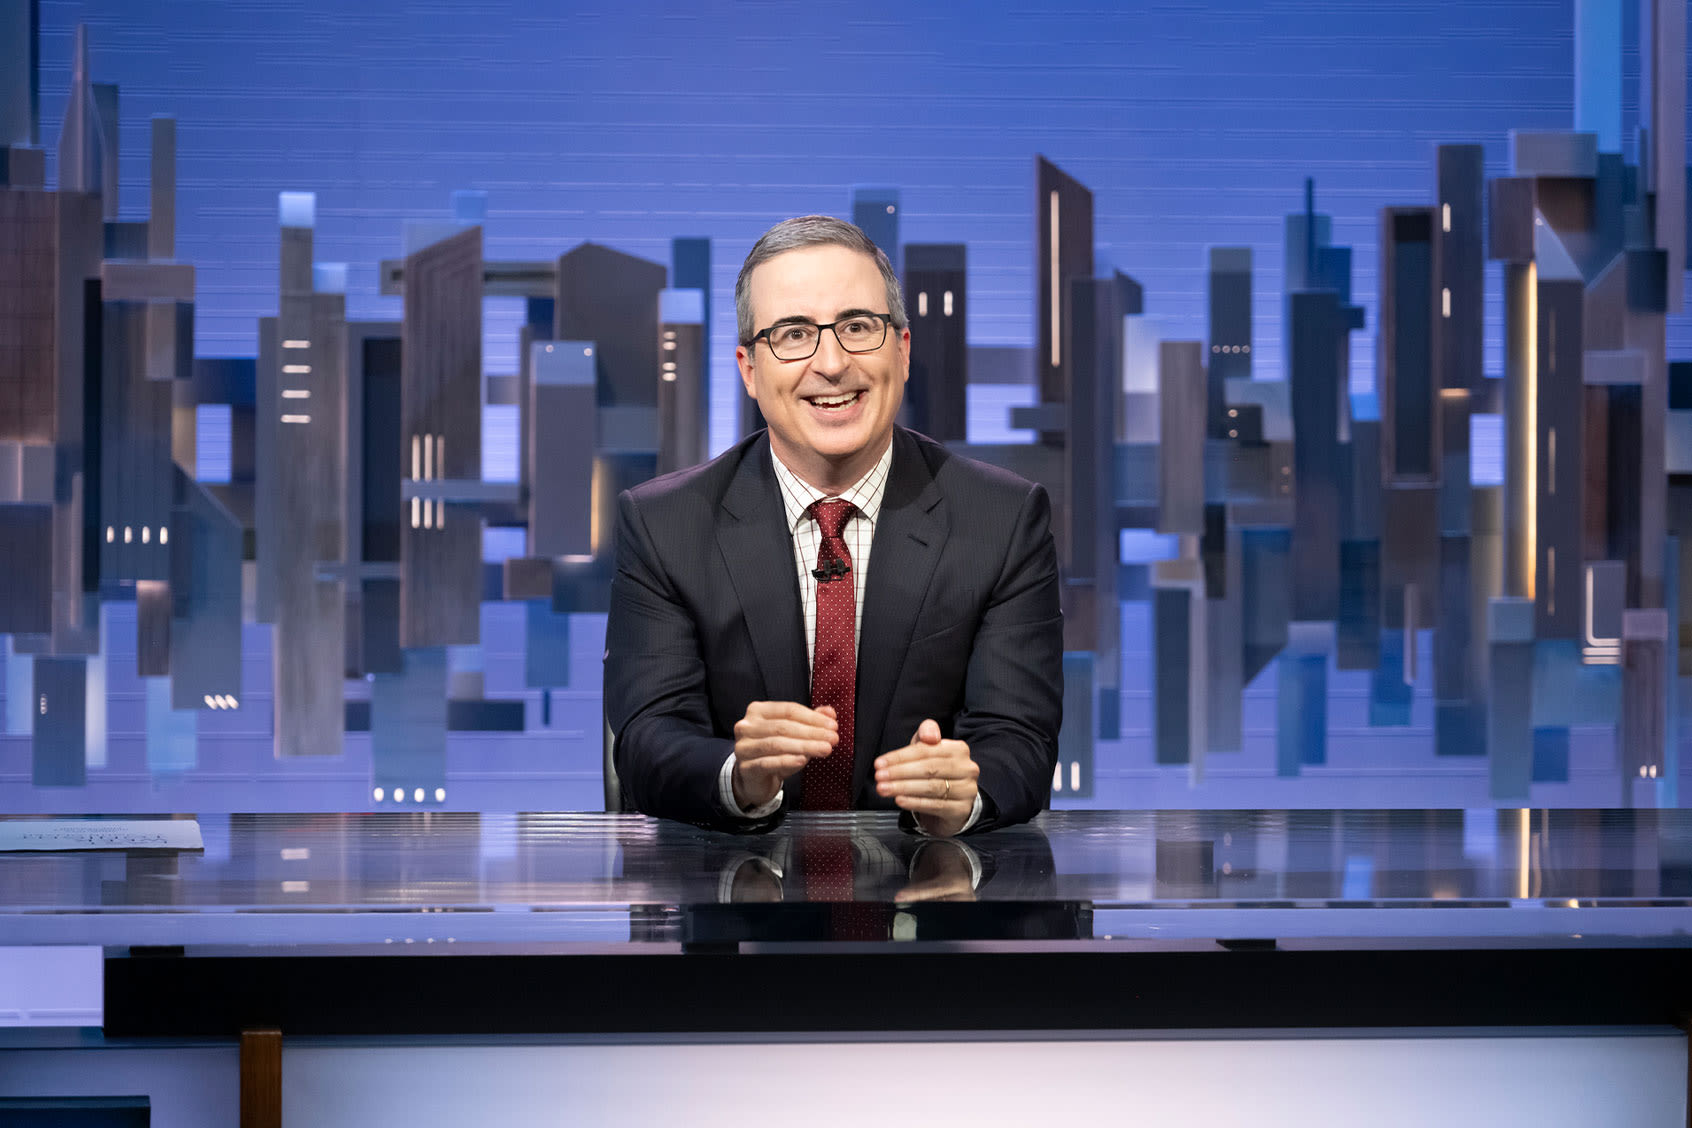 John Oliver takes on Donald Trump and the "long history" of politicians being "weird around corn"